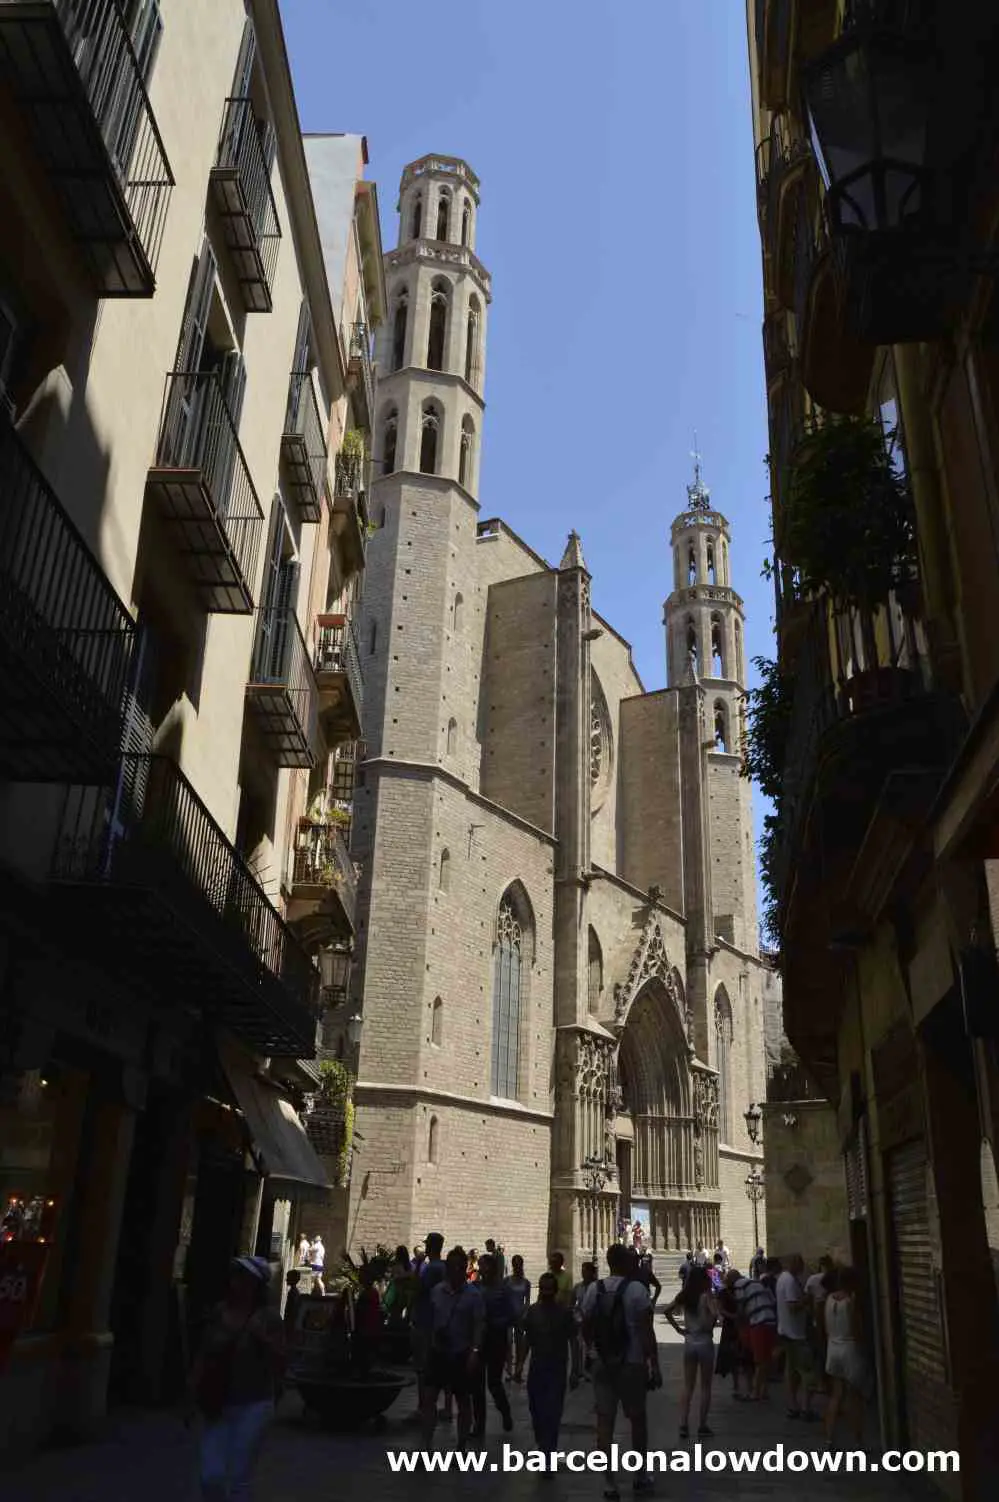 The main entrance to the Cathedral of the sea Barcelona